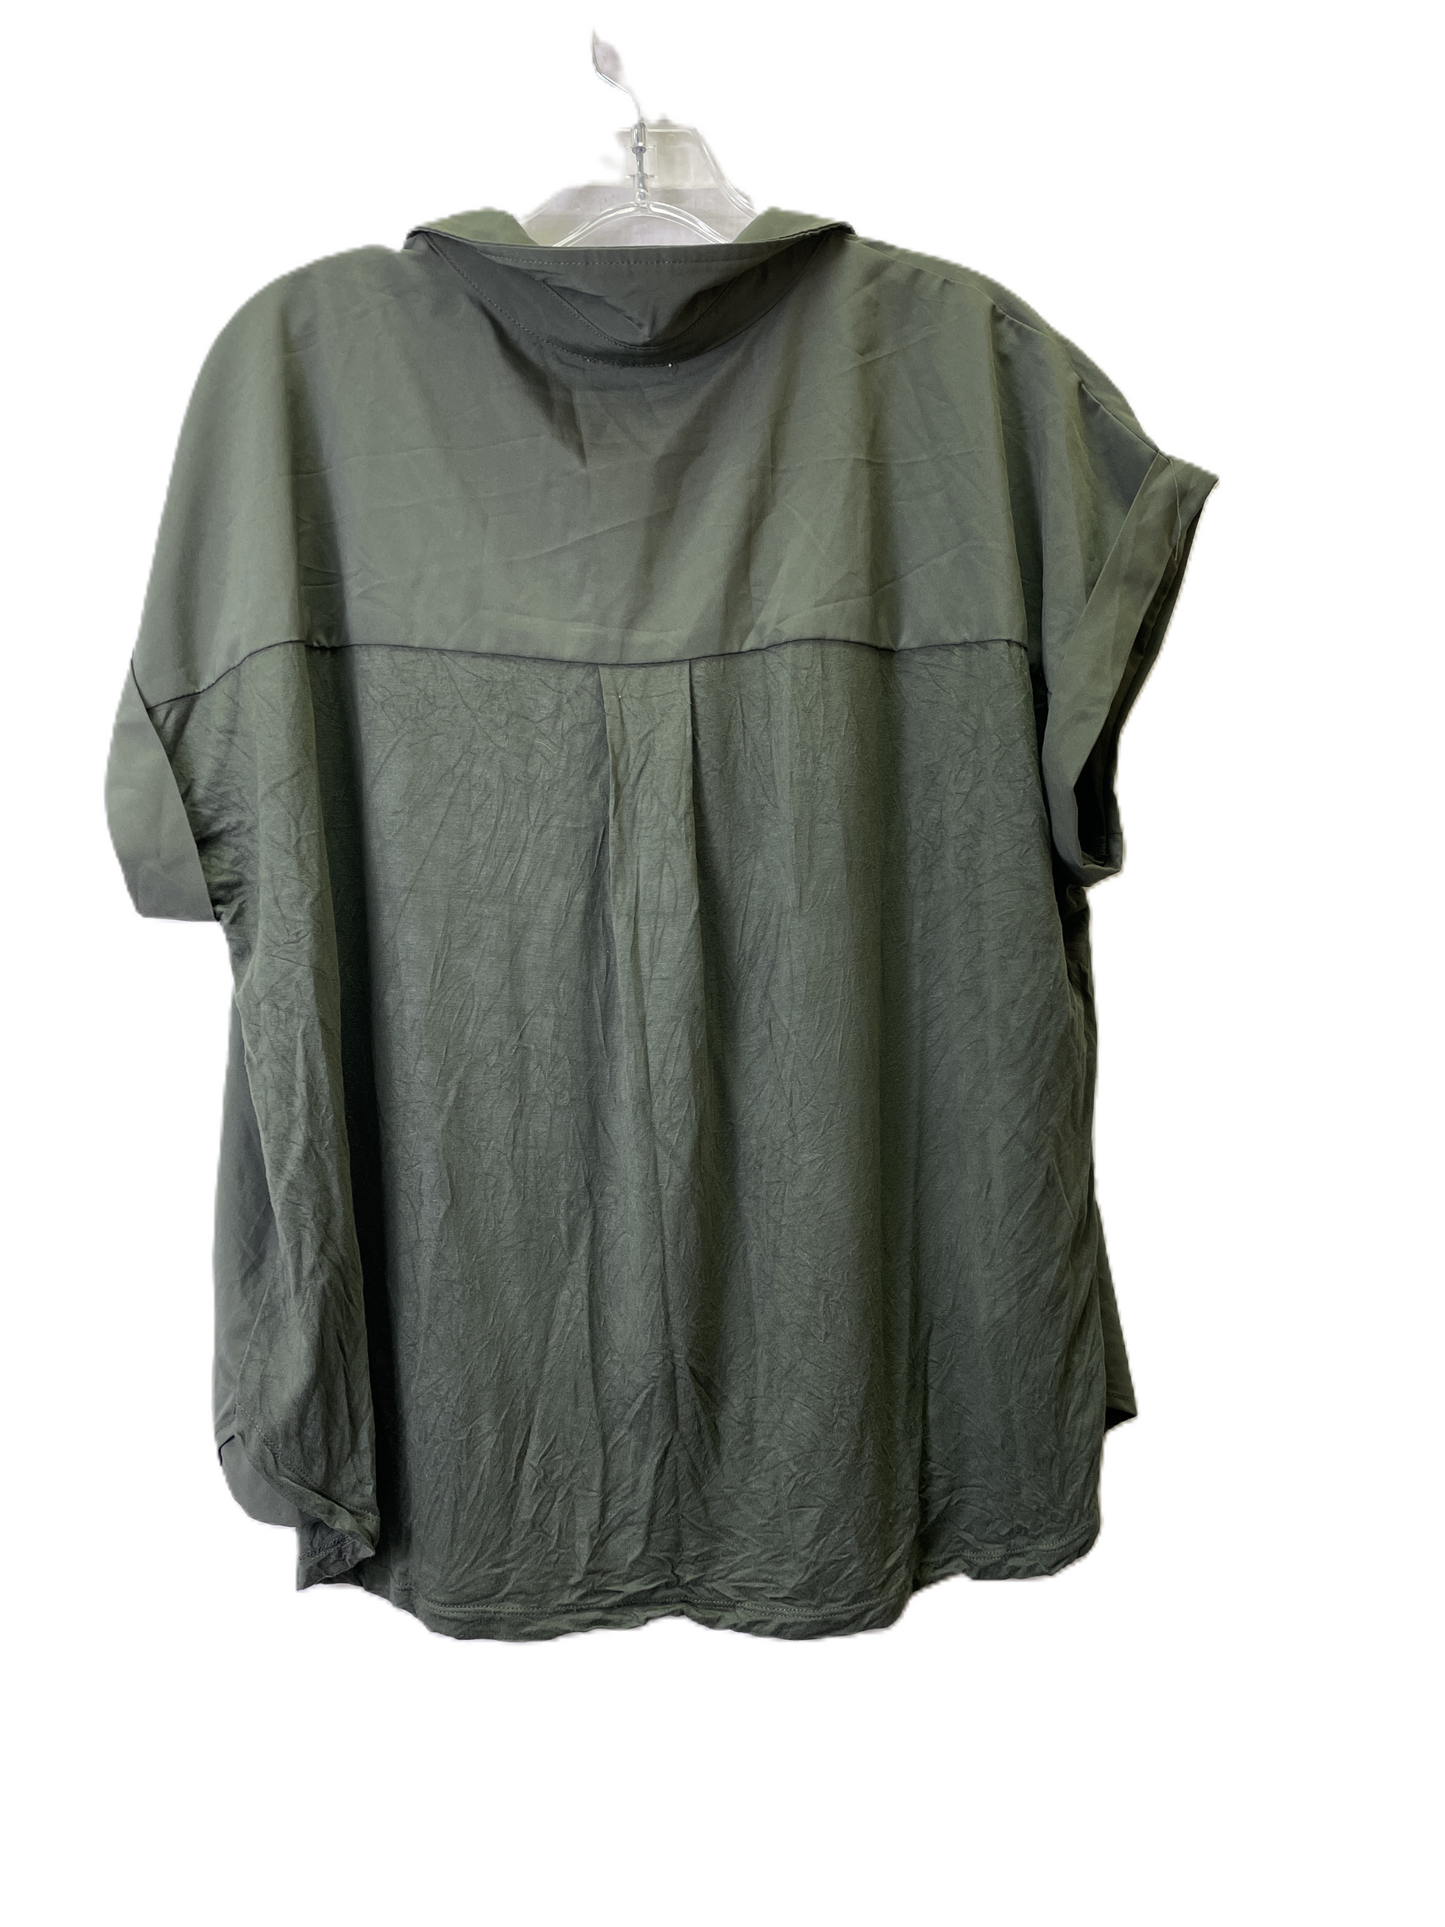 Green Top Short Sleeve By Harper, Size: Xl